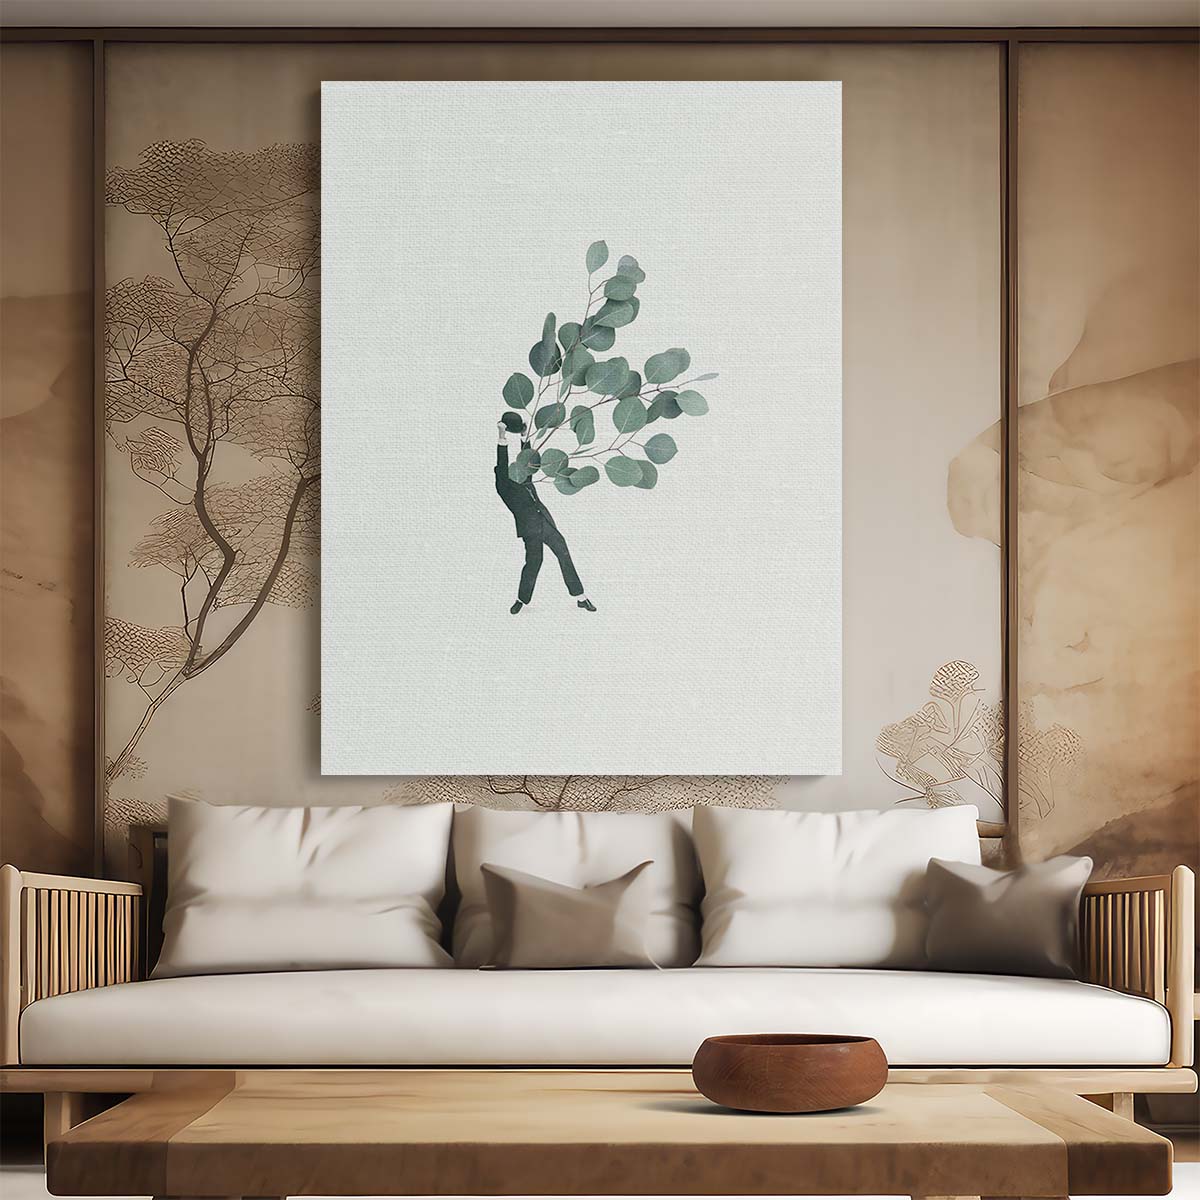 Mid-Century Surrealist Botanical Illustration - The Extravert by Maarten Leon by Luxuriance Designs, made in USA